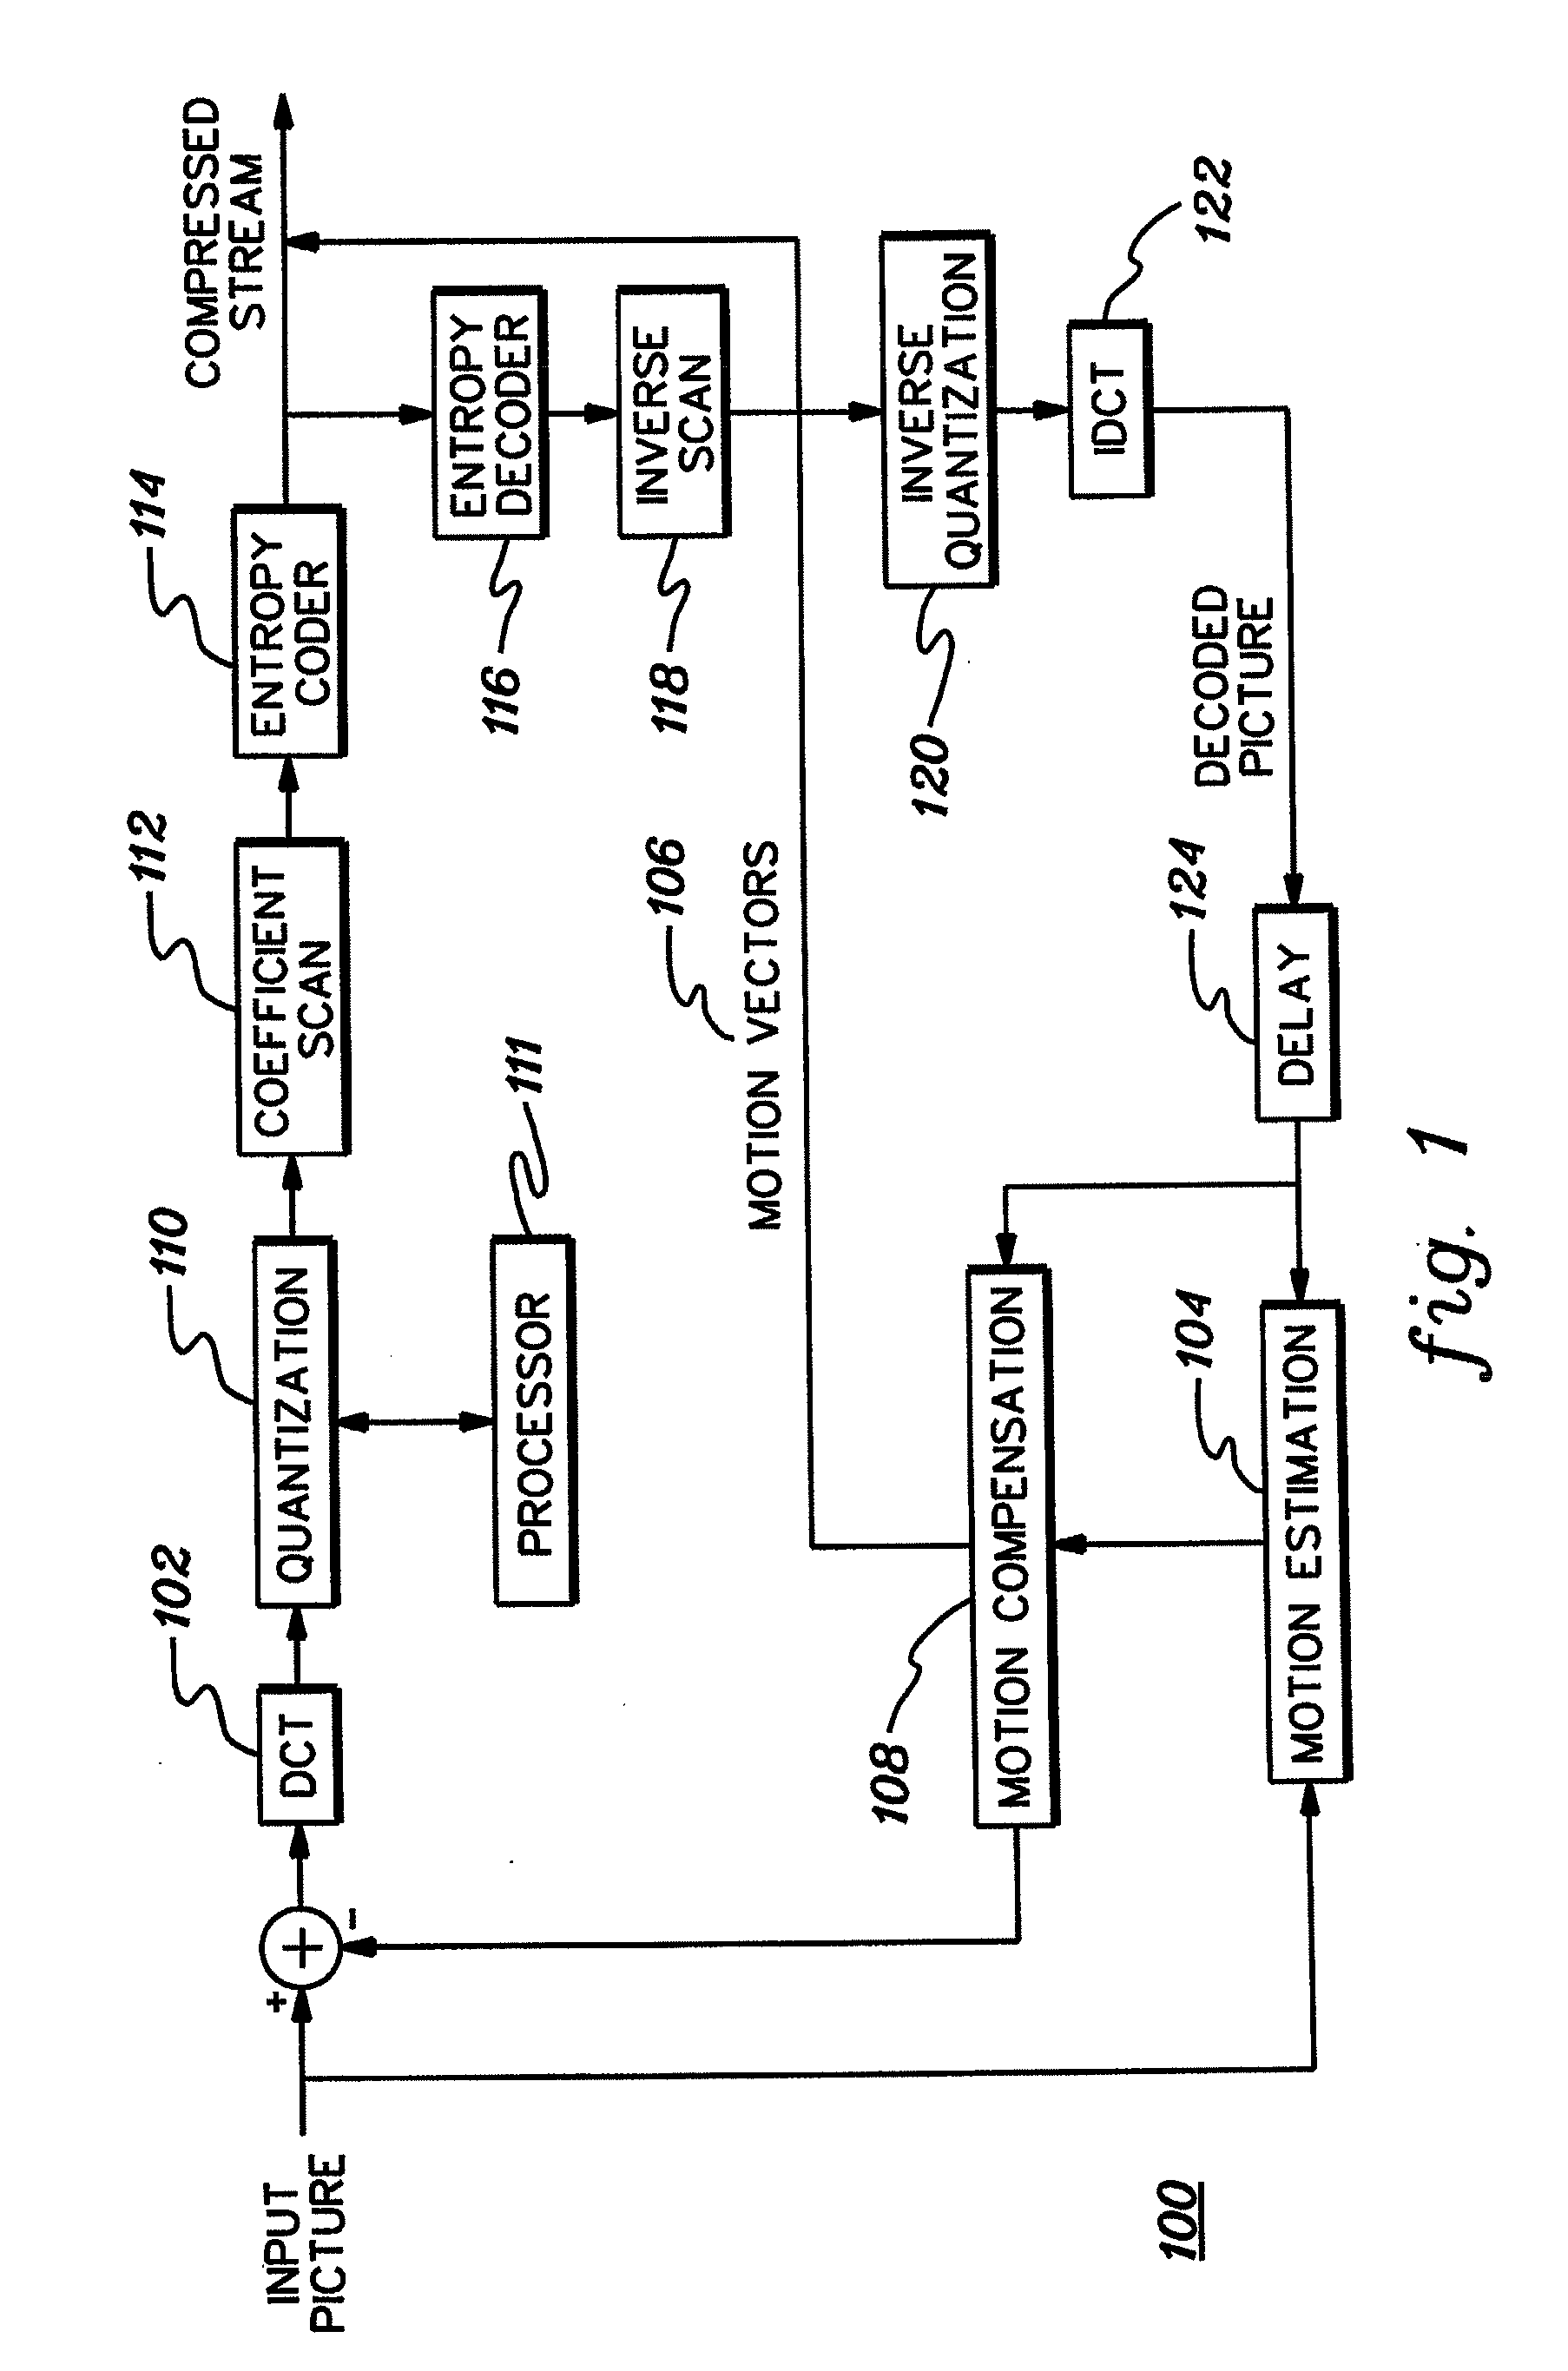 Single pass variable bit rate control strategy and encoder for processing a video frame of a sequence of video frames